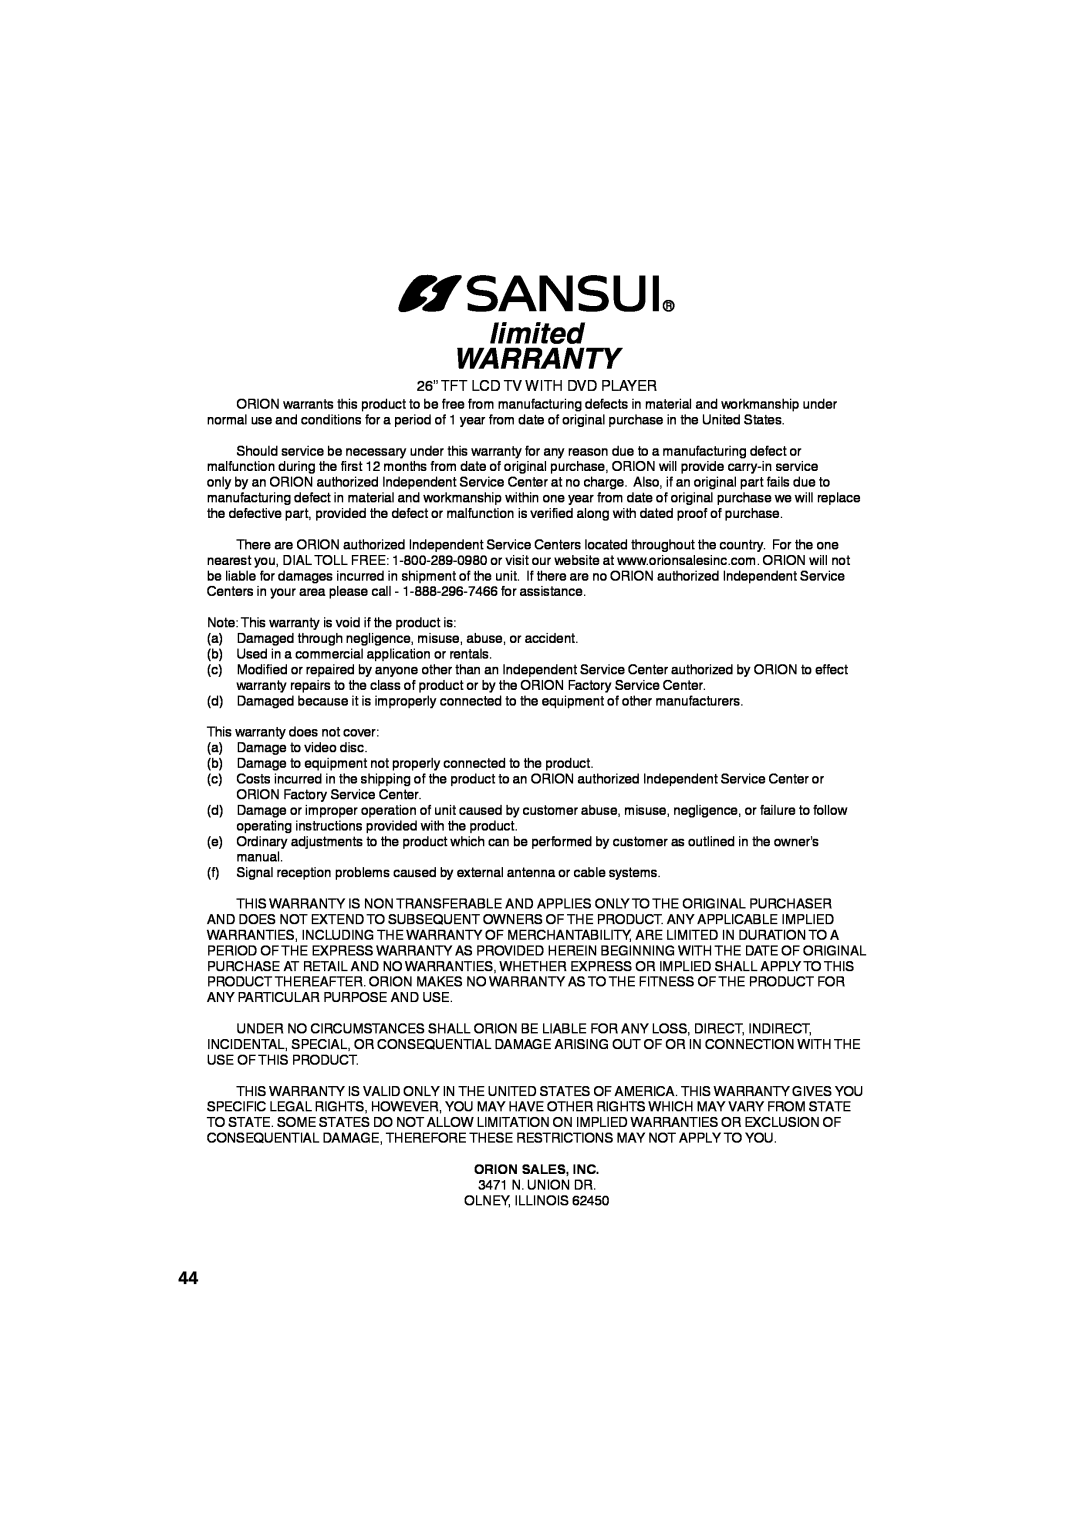 Sansui HDLCDVD265 owner manual limited WARRANTY, 26” TFT LCD TV WITH DVD PLAYER, Orion Sales, Inc 